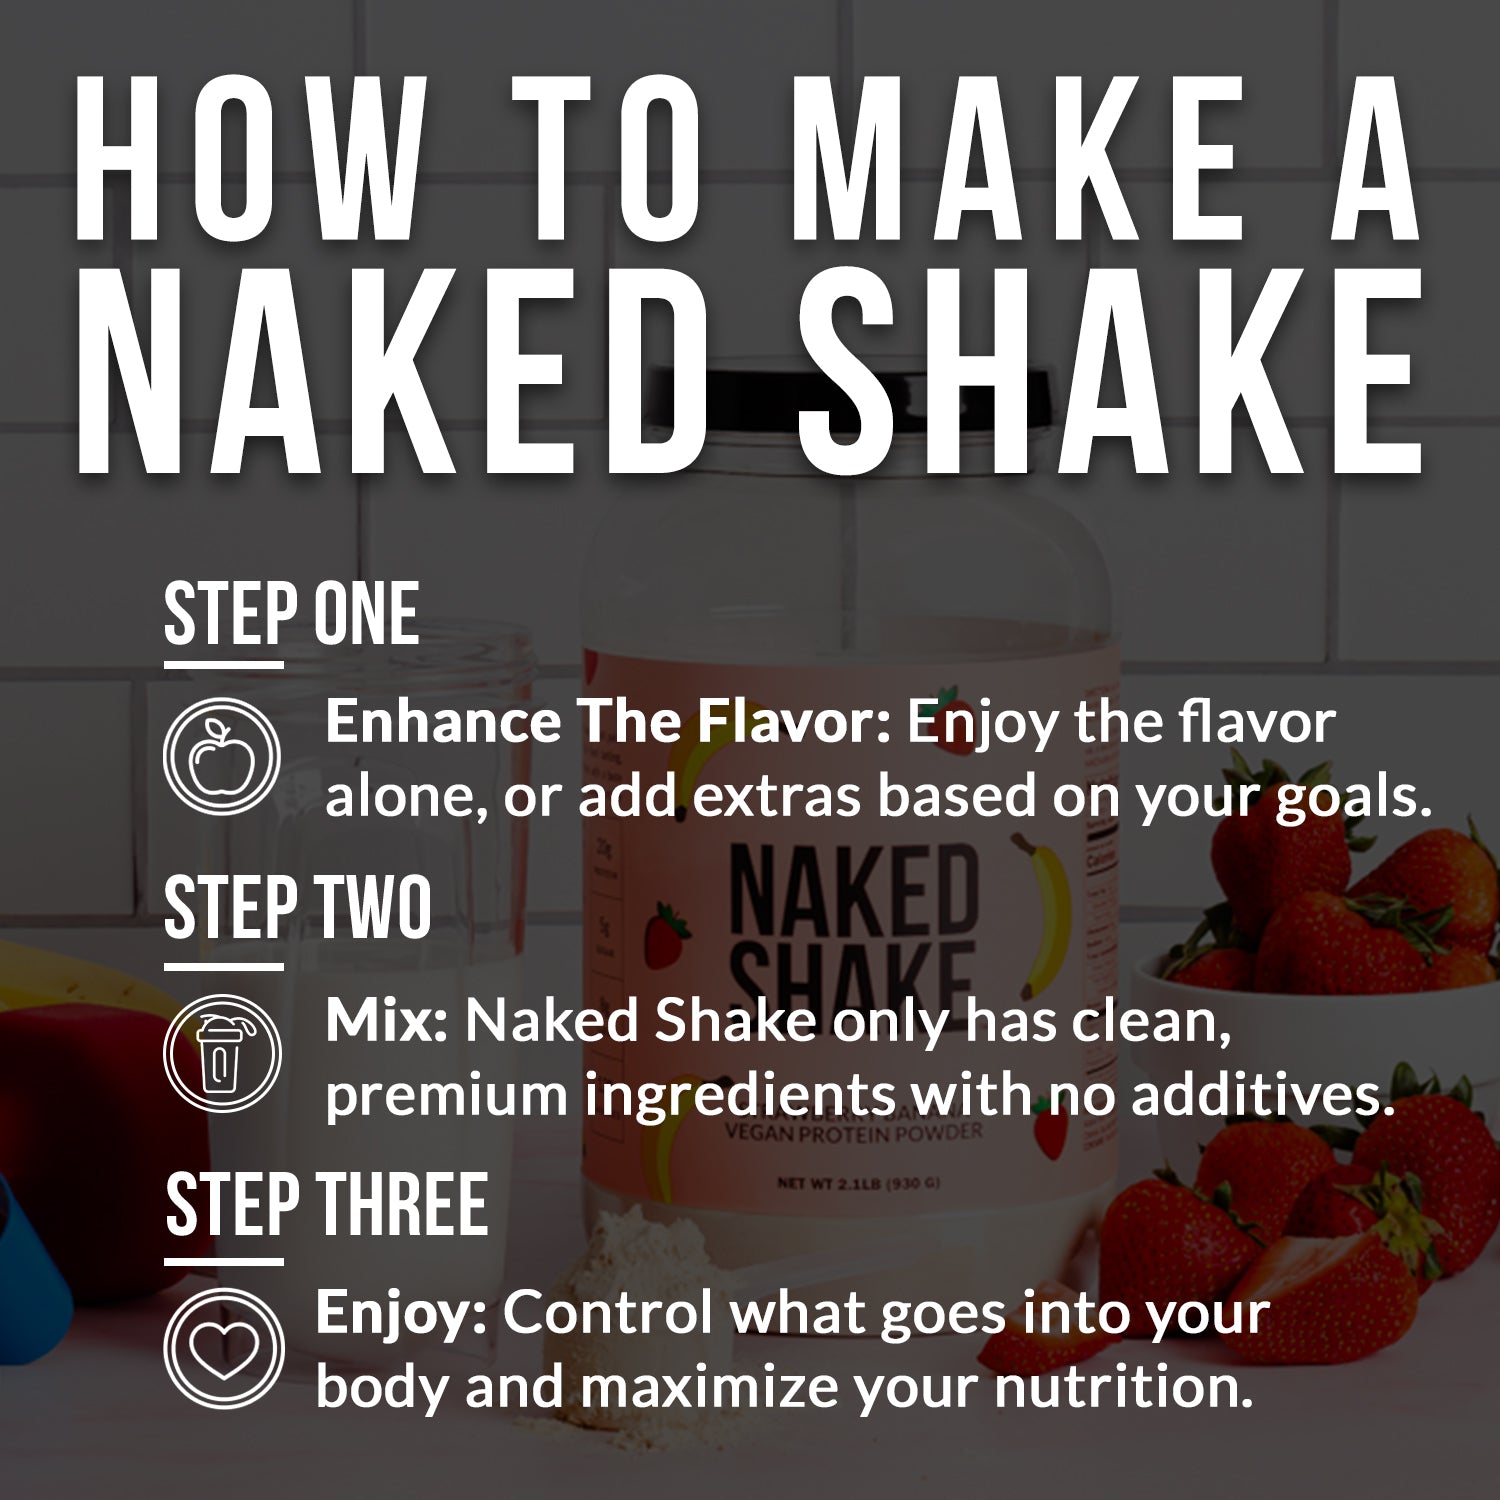 Naked Insulated Stainless Steel Shaker – Naked Nutrition